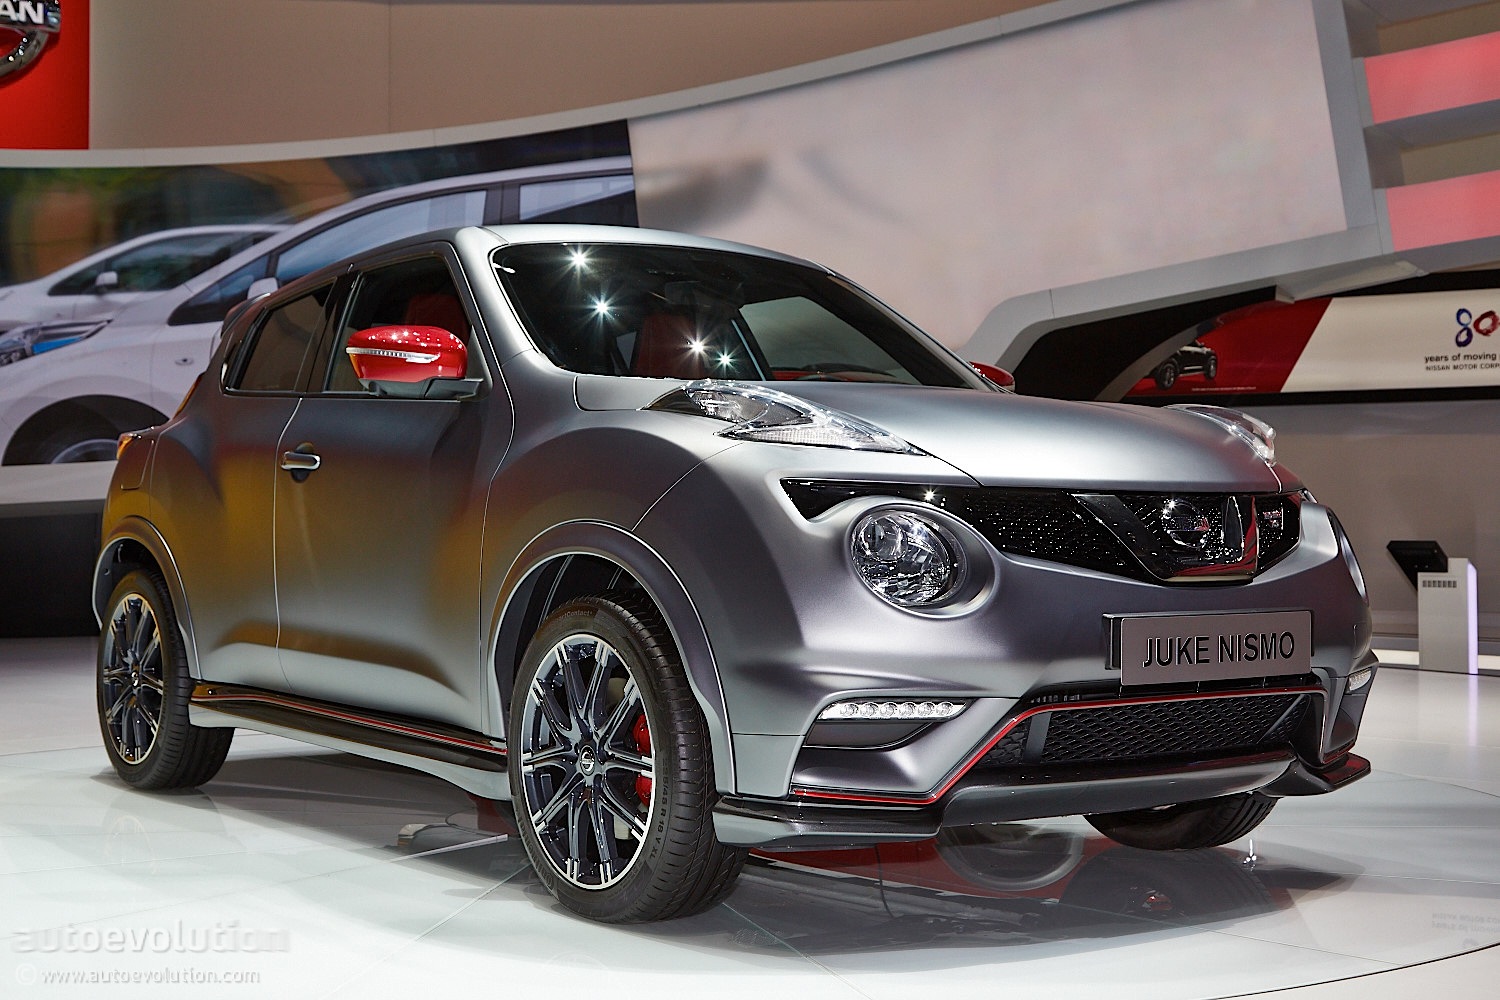 Nissan Juke Nismo Rs Facelift Debuts In Geneva With 218 Hp Live Photos Autoevolution